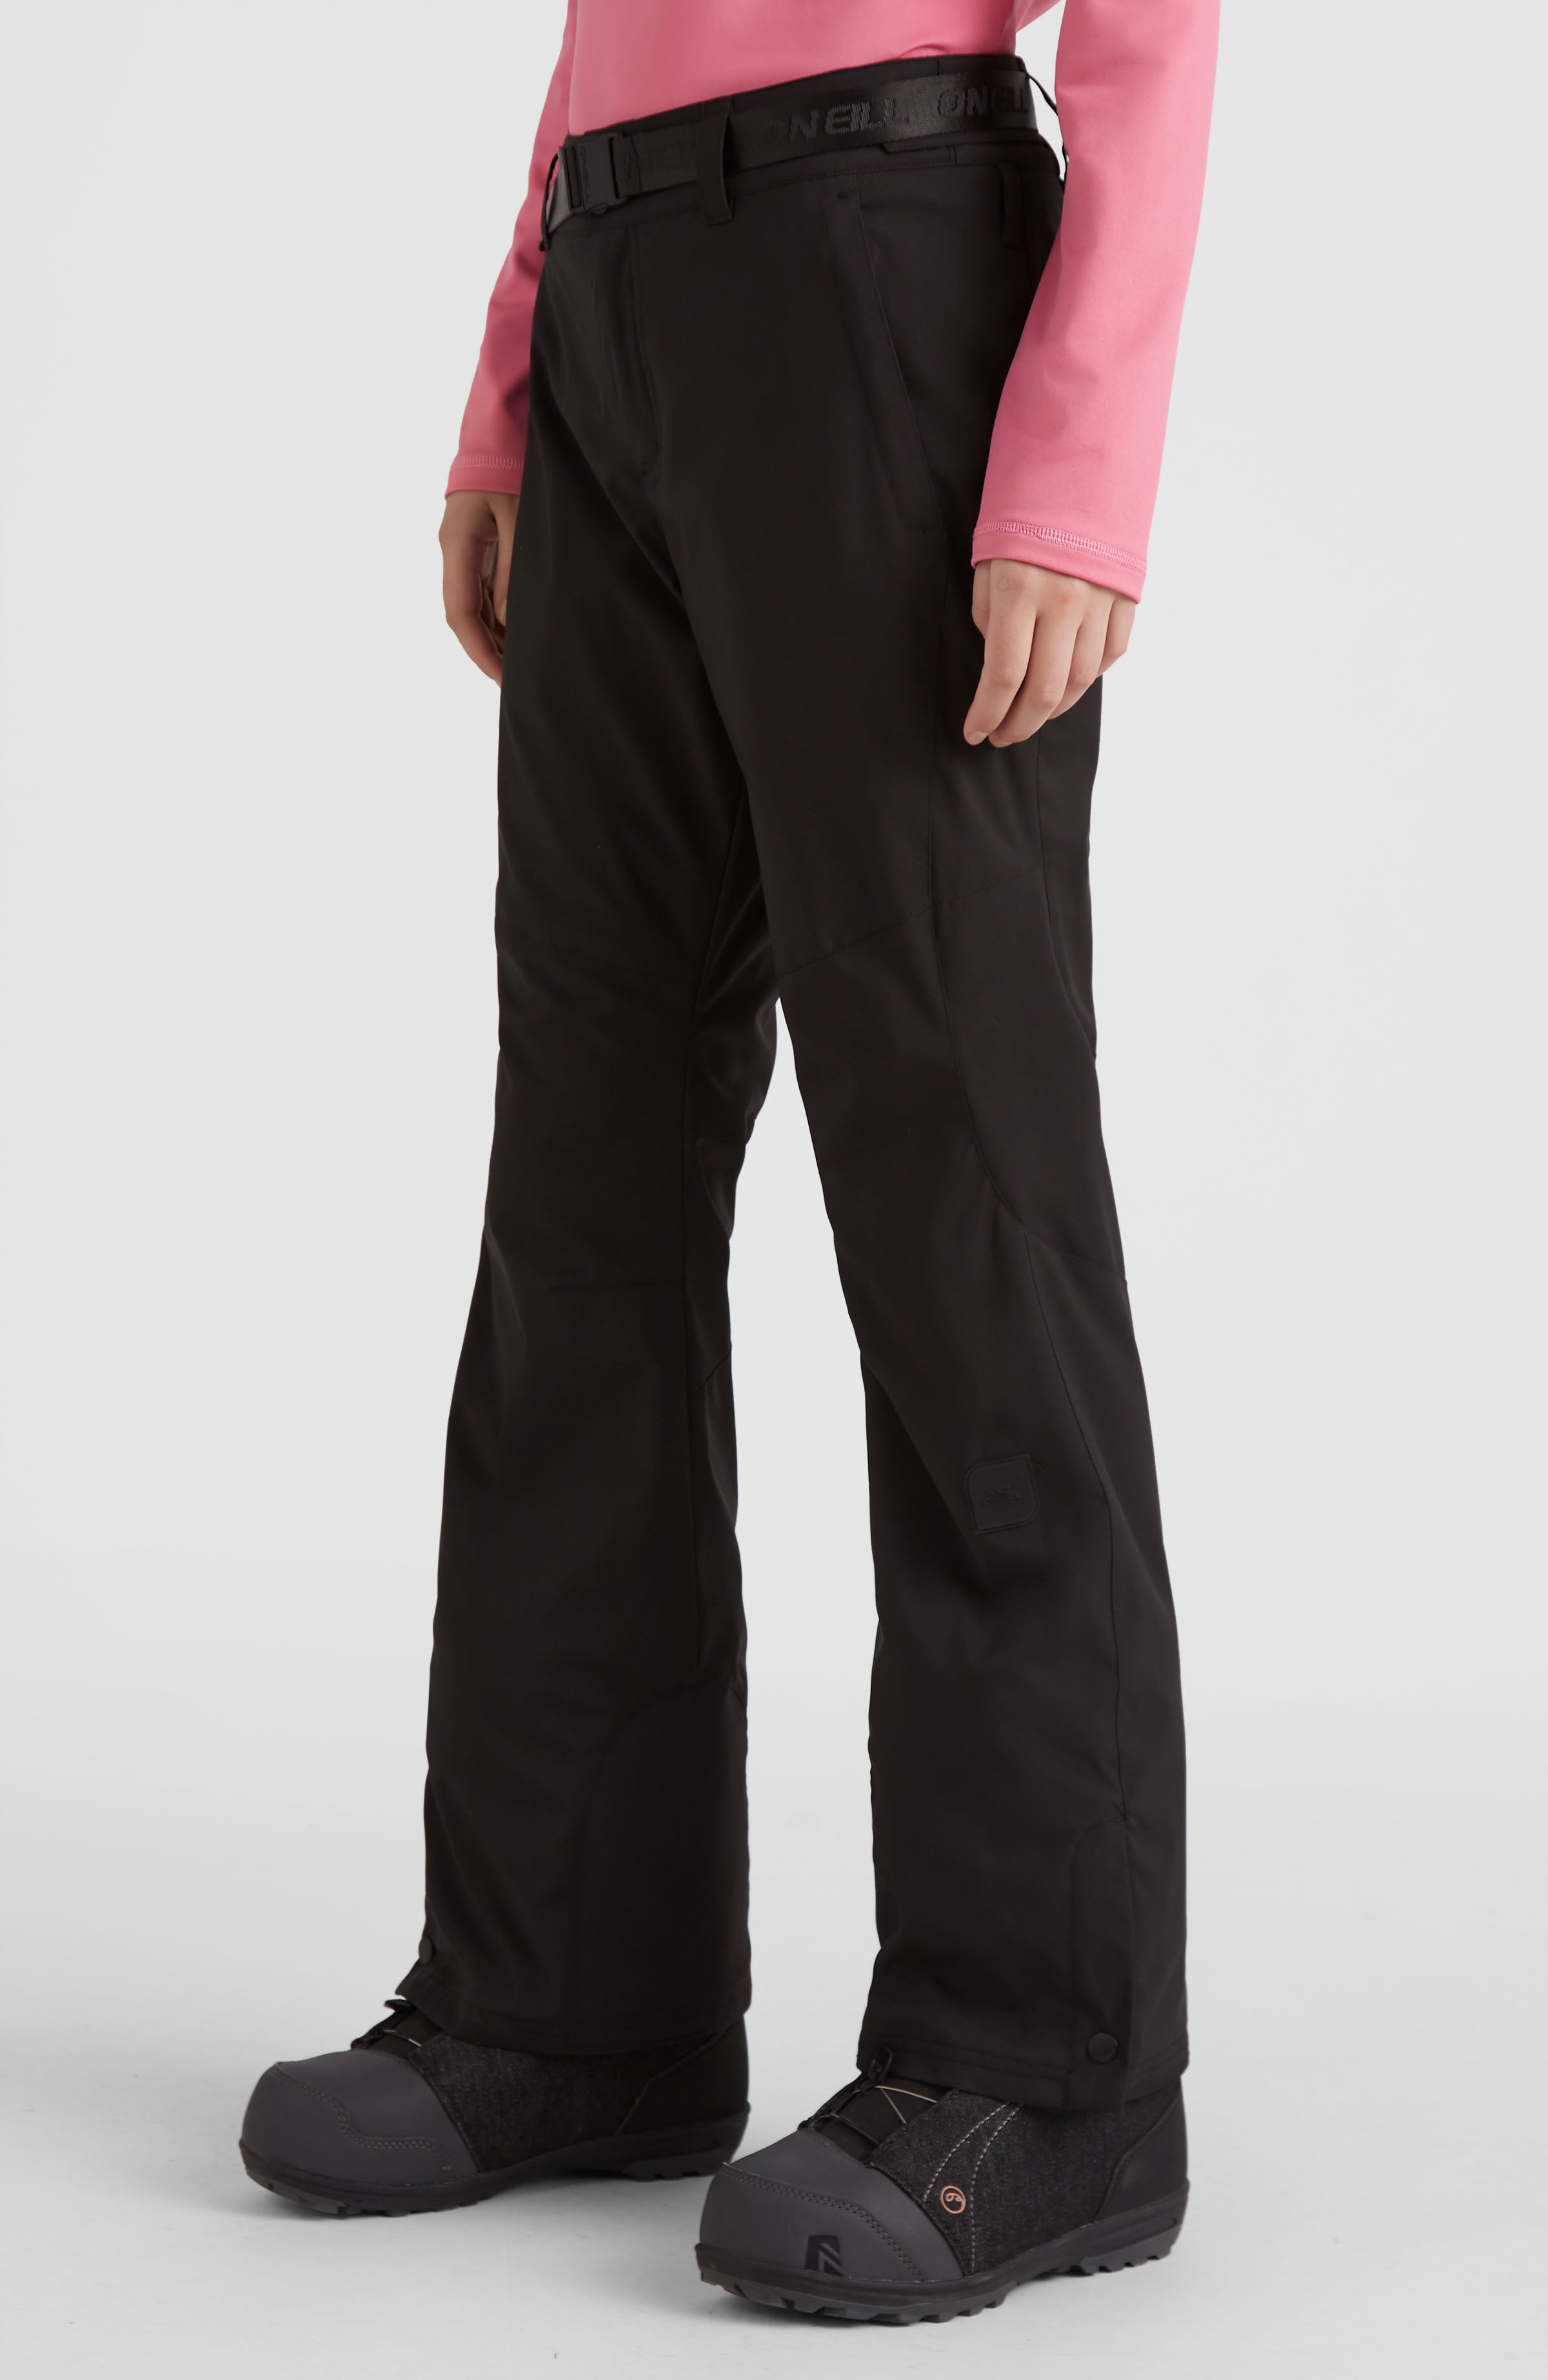 Womens Freedom Insulated Pant  Short  Sports Basement